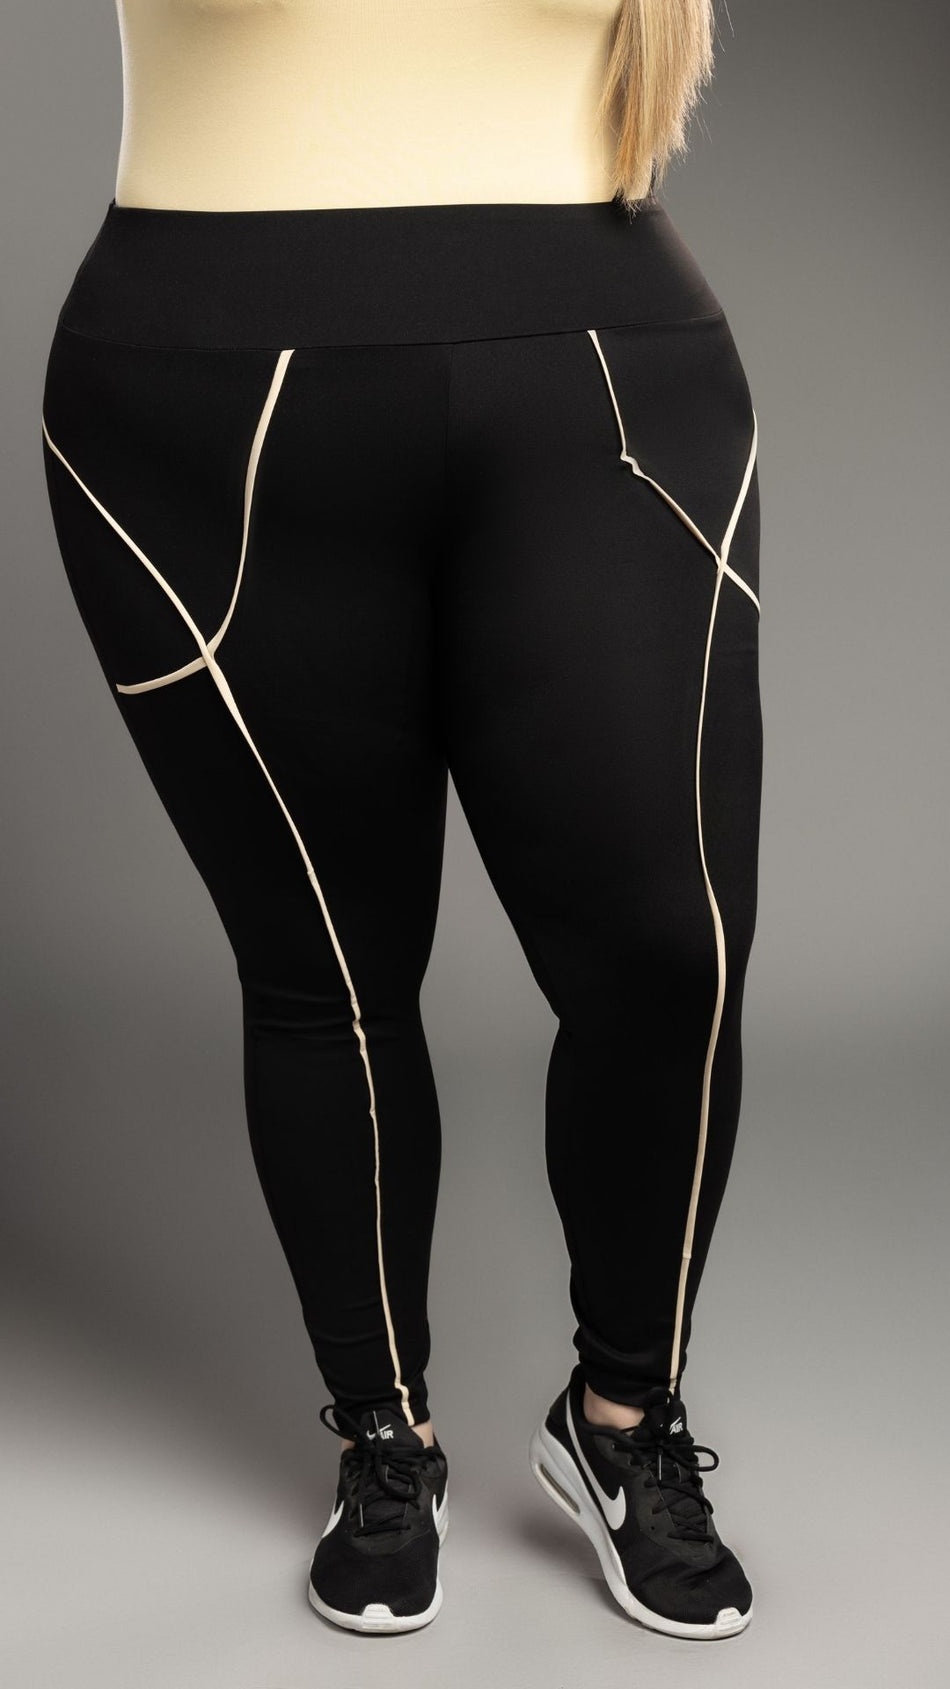 Stitched Black Leggings w/ Piping – Tamela Mann Collection